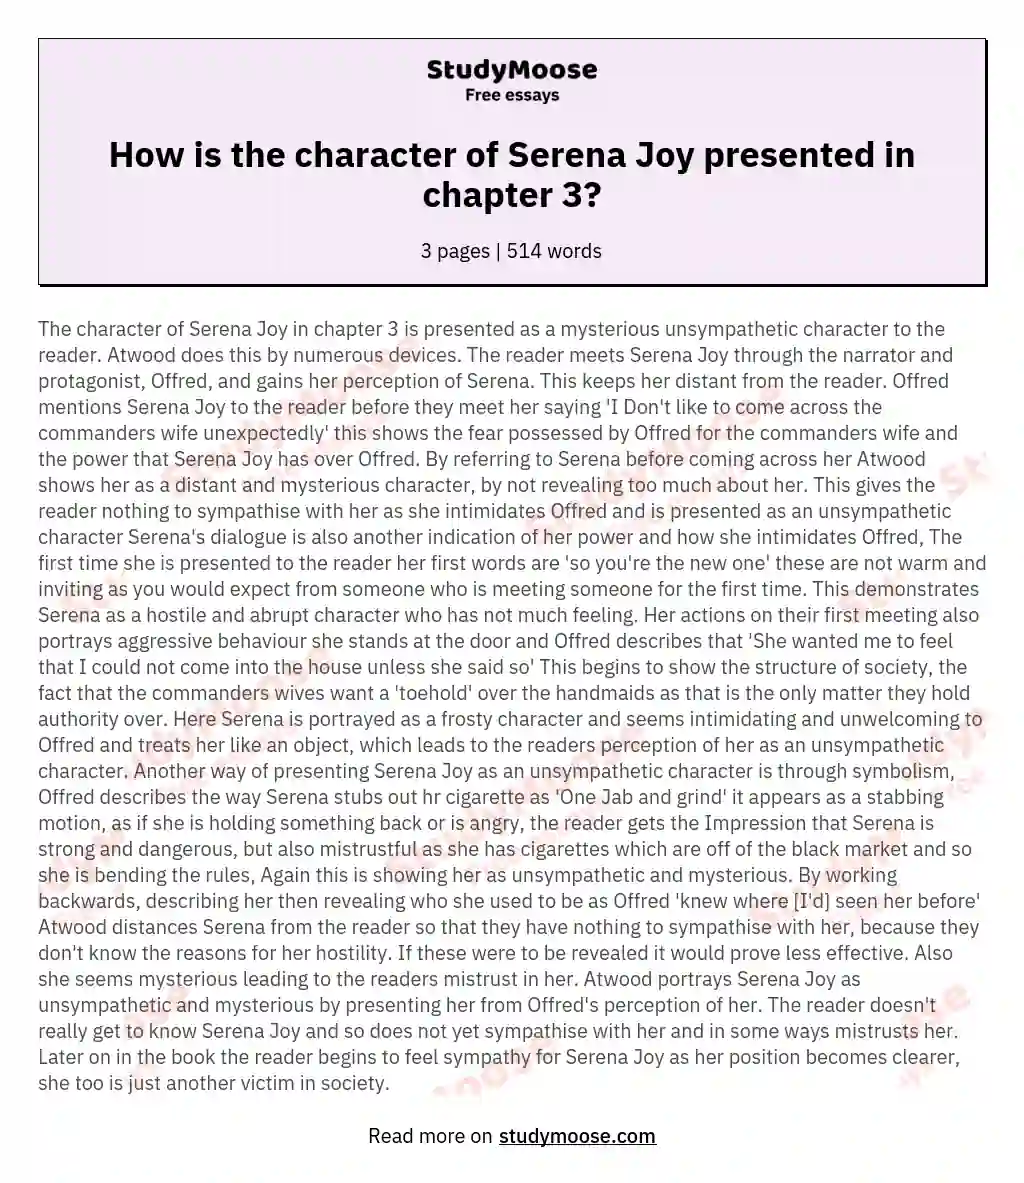 How is the character of Serena Joy presented in chapter 3? essay